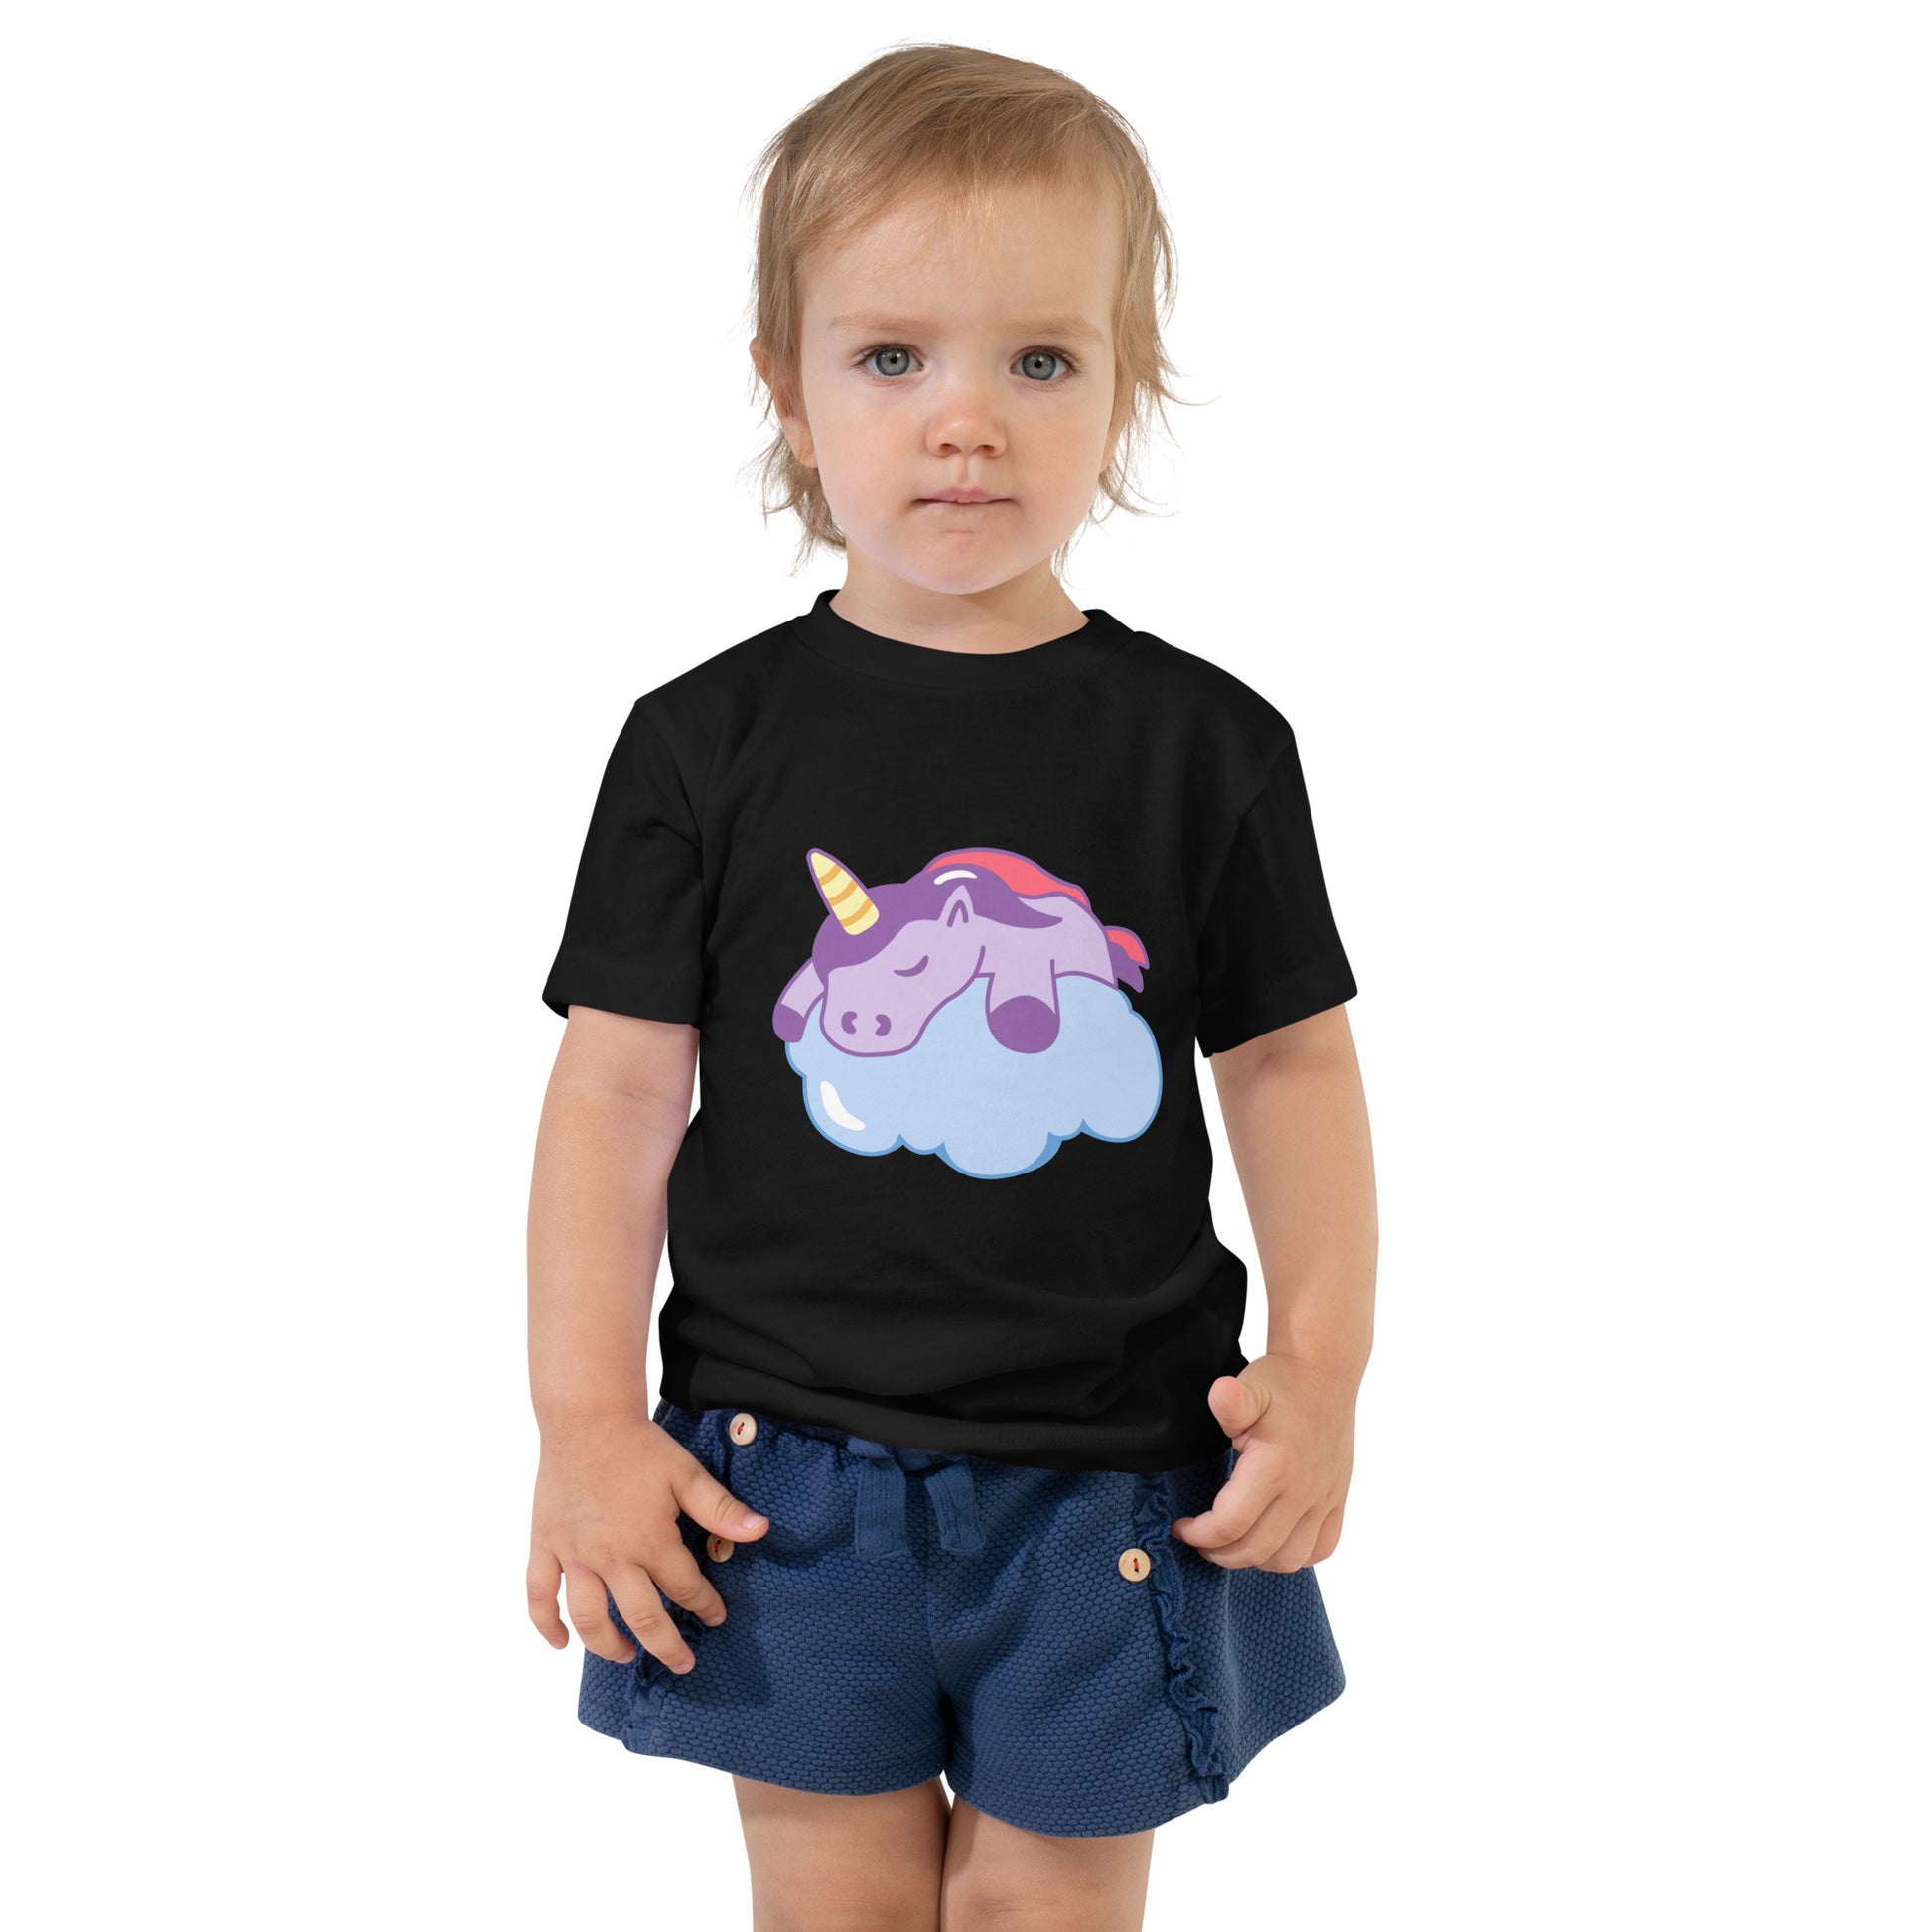 Toddler with a black T-shirt with a print of a sleeping unicorn on a cloud